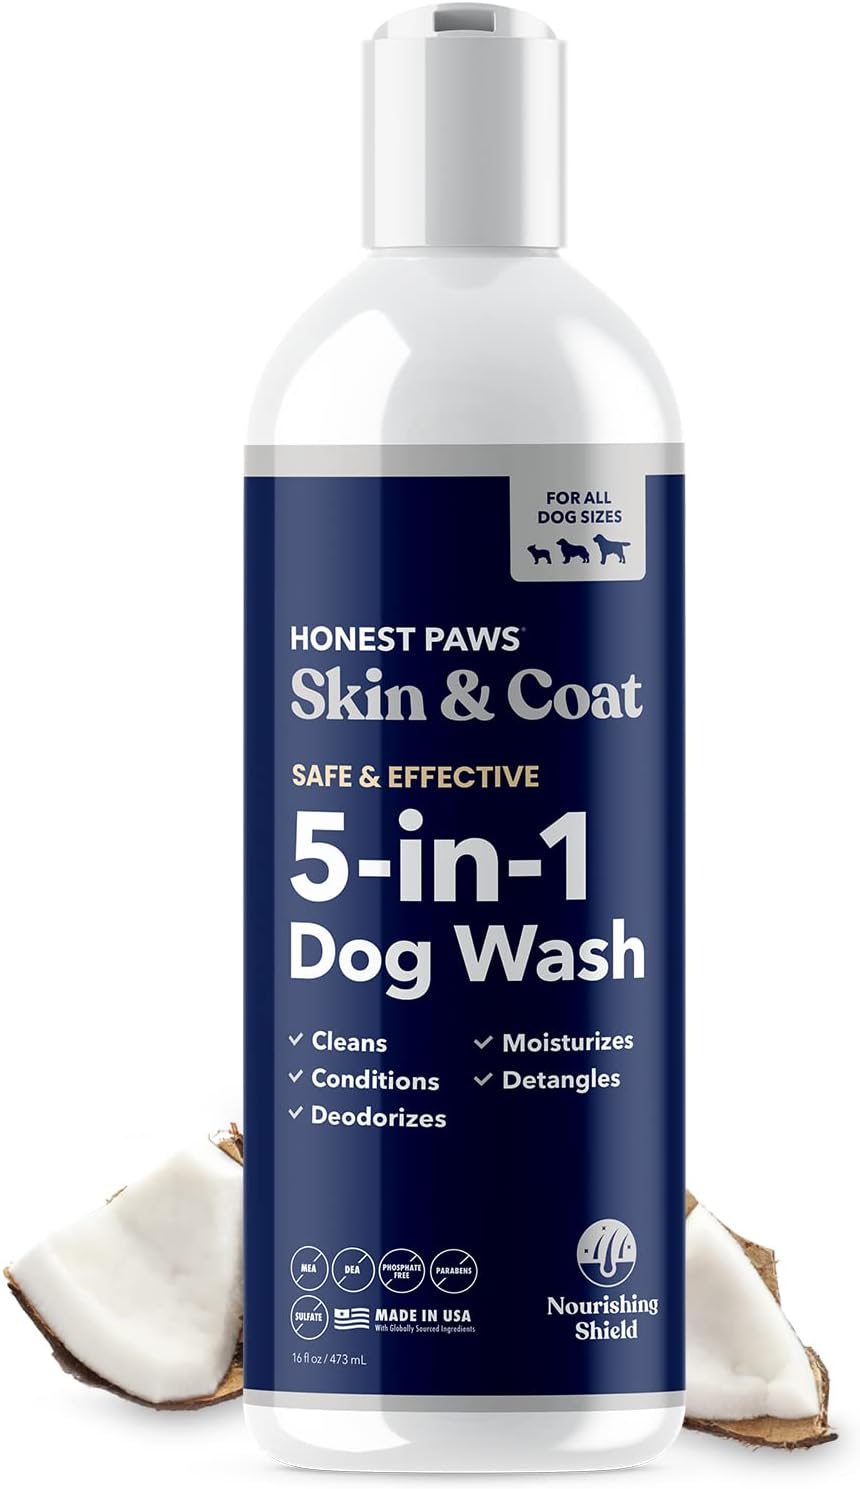 A white and navy slim dog shampoo bottle with two coconut slices at the bottom.